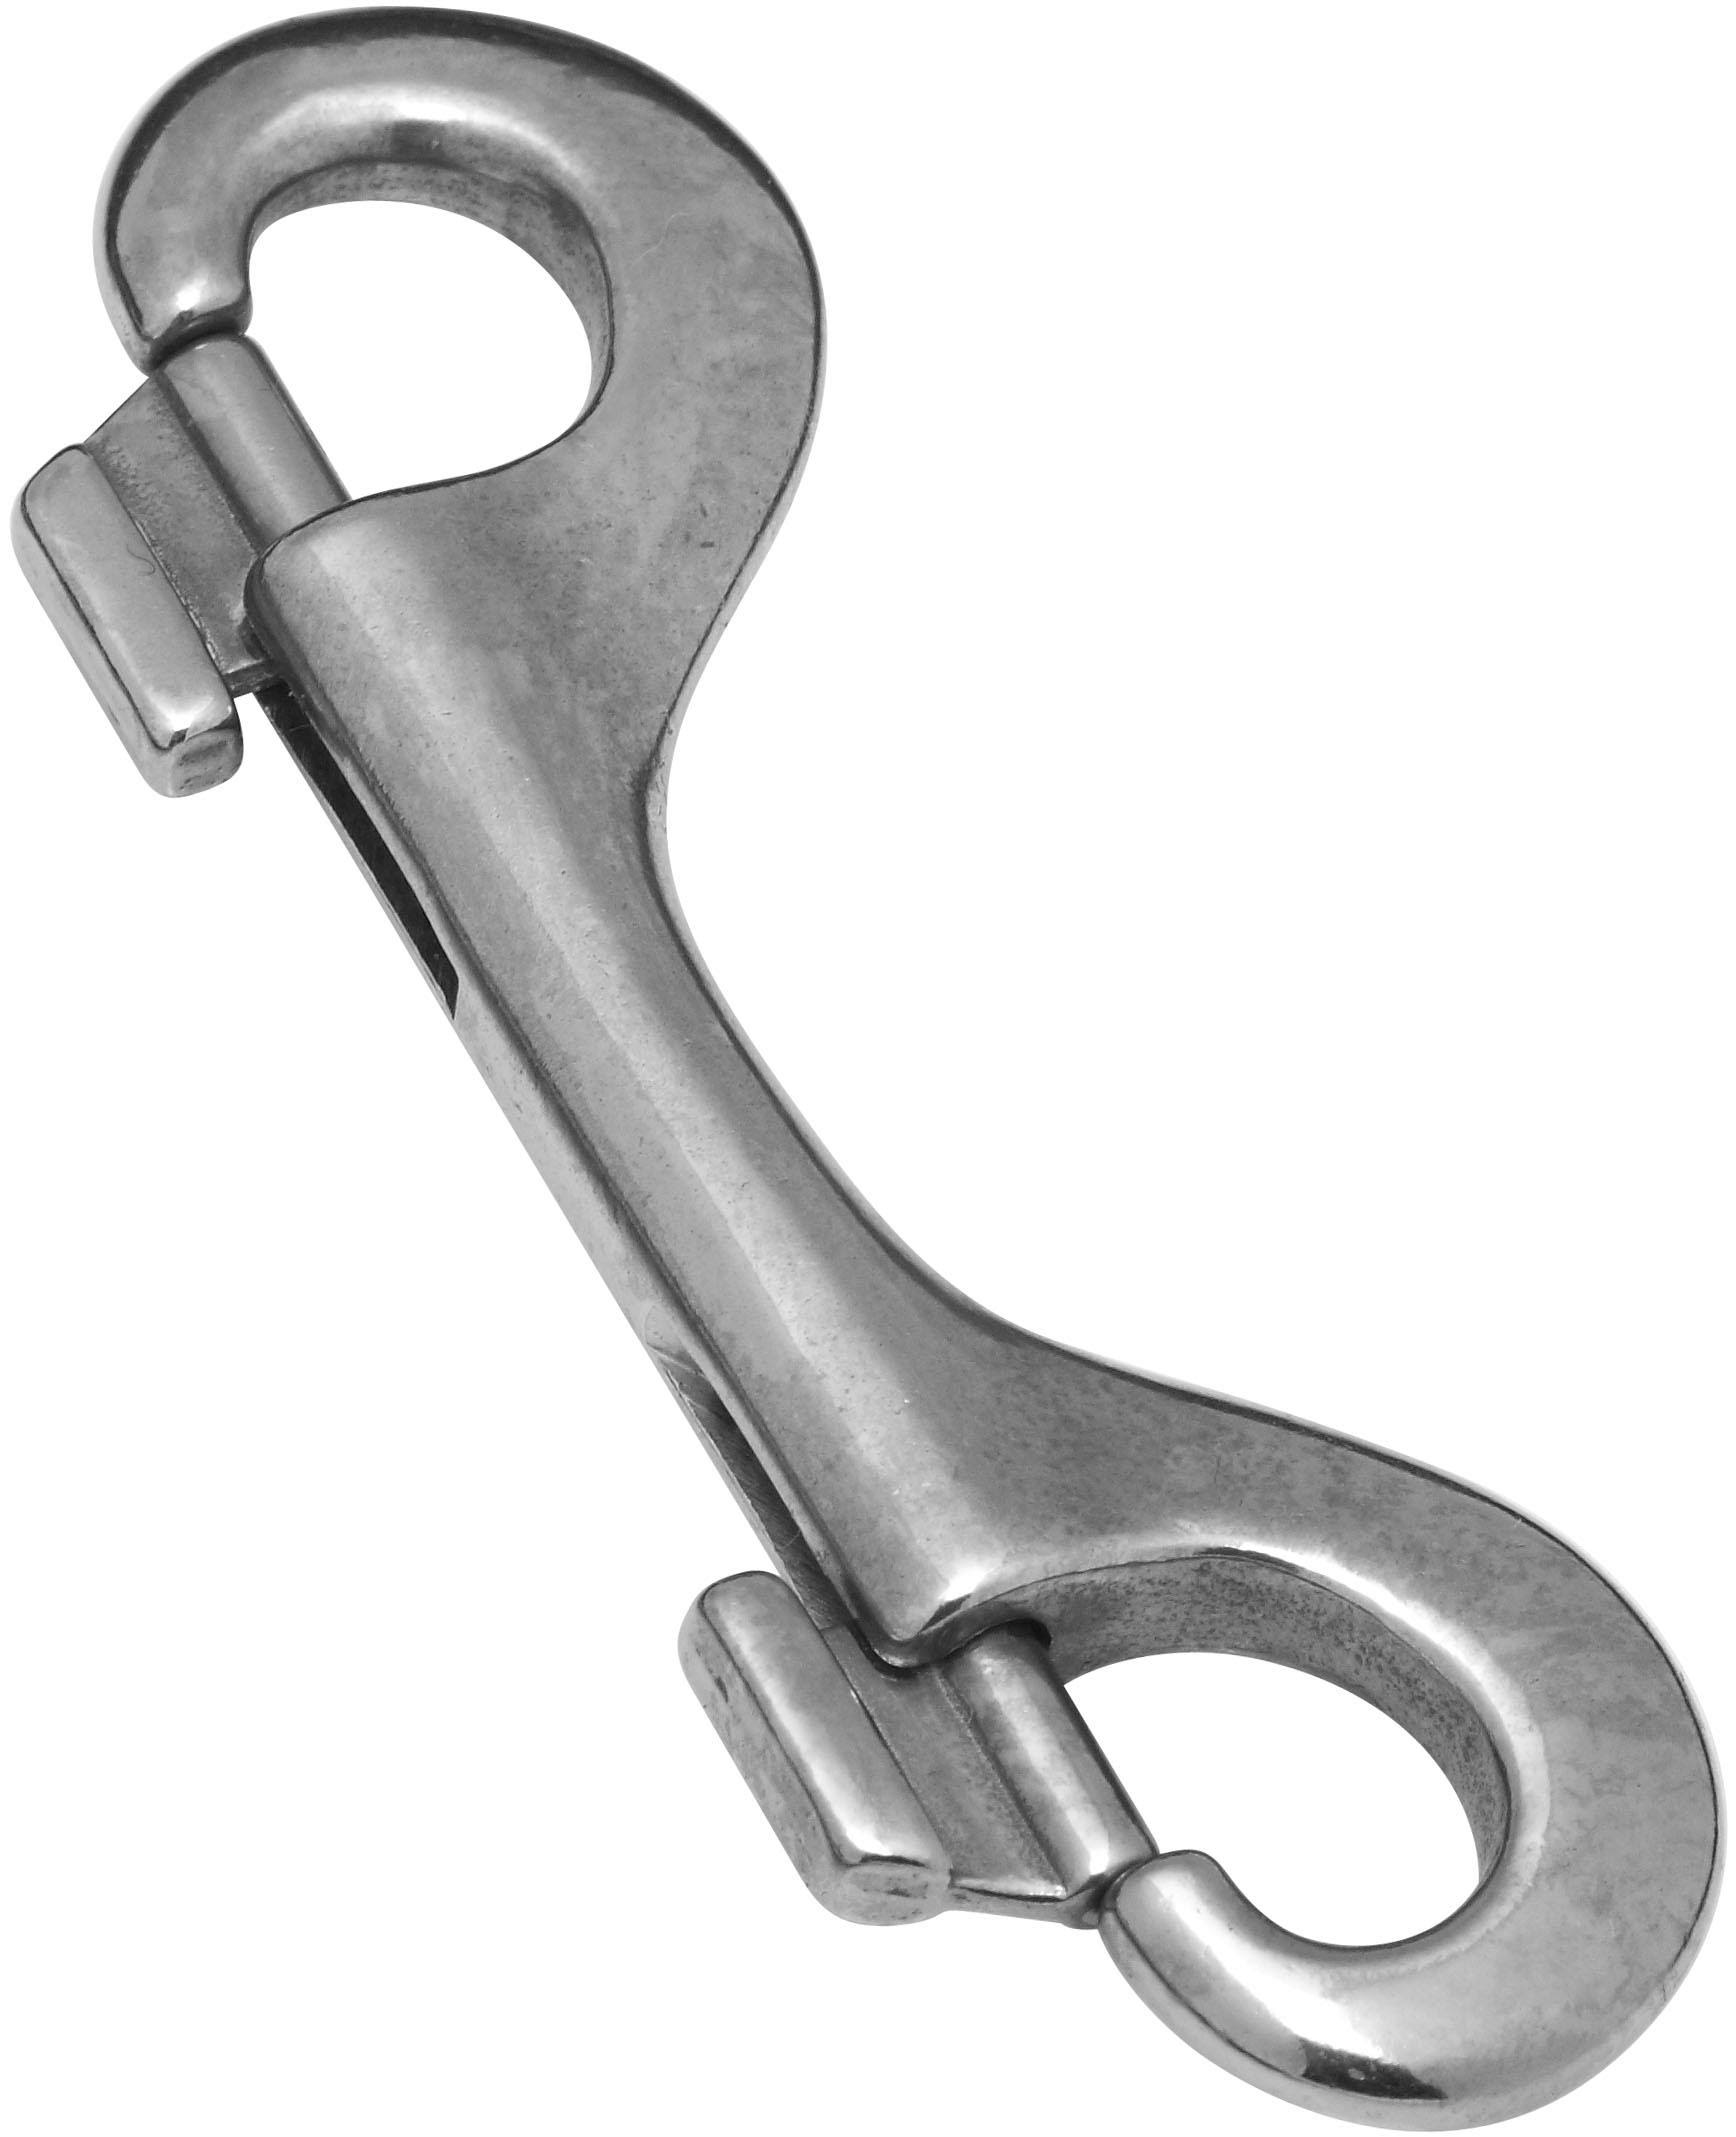 Stanley National Hardware Double Bolt Snap - Stainless Steel, 10cm